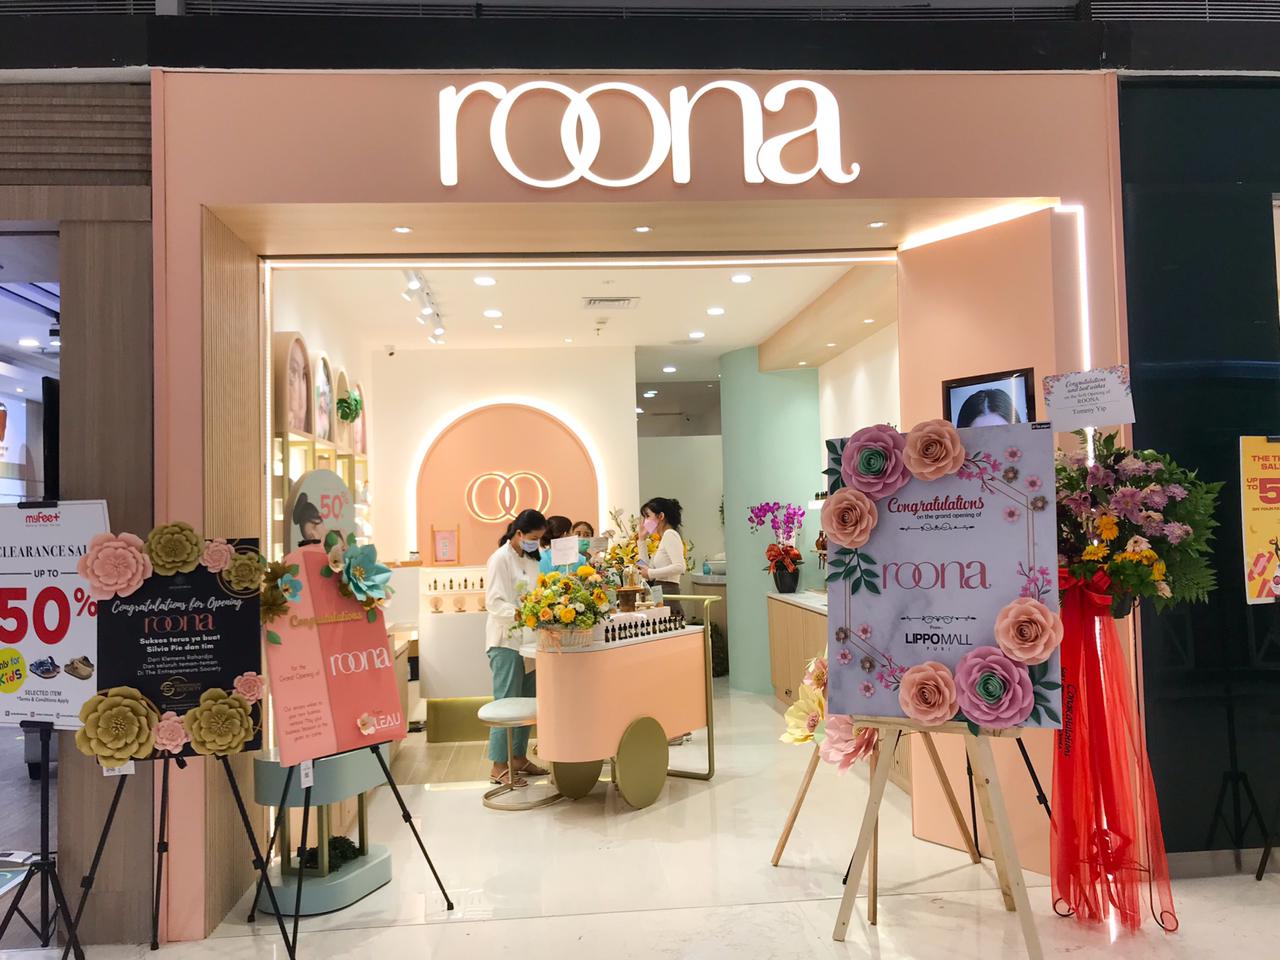 Roona shop front in lippo mall puri st. moritz